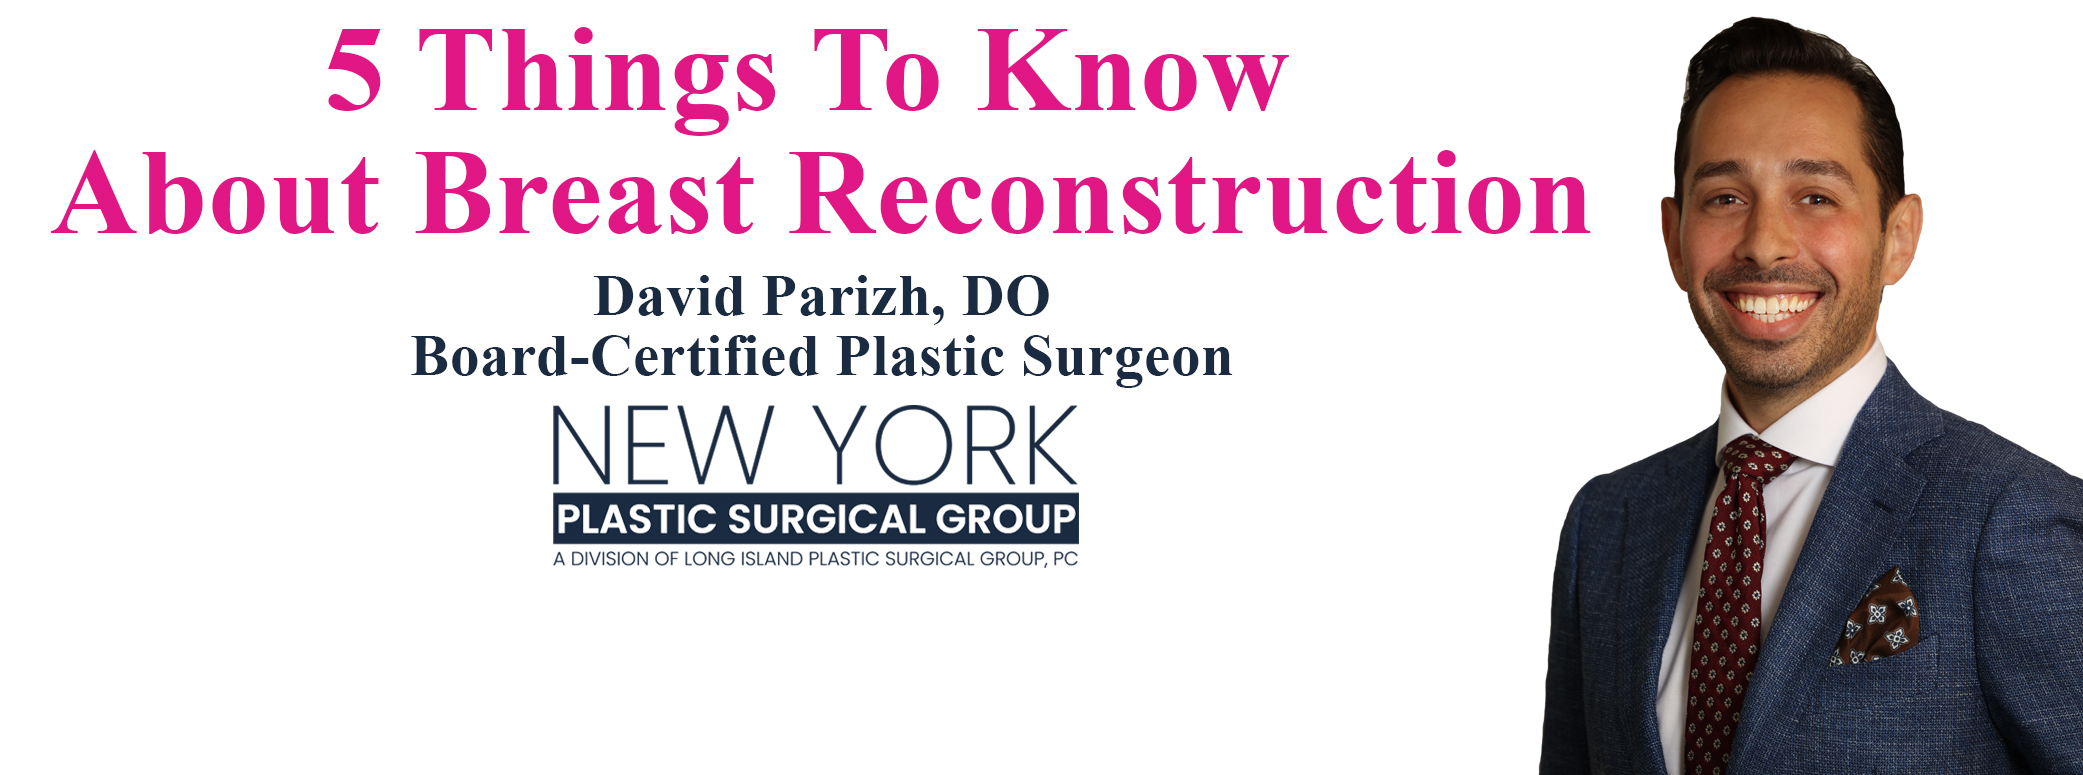 5thingstoknow_reconstruction